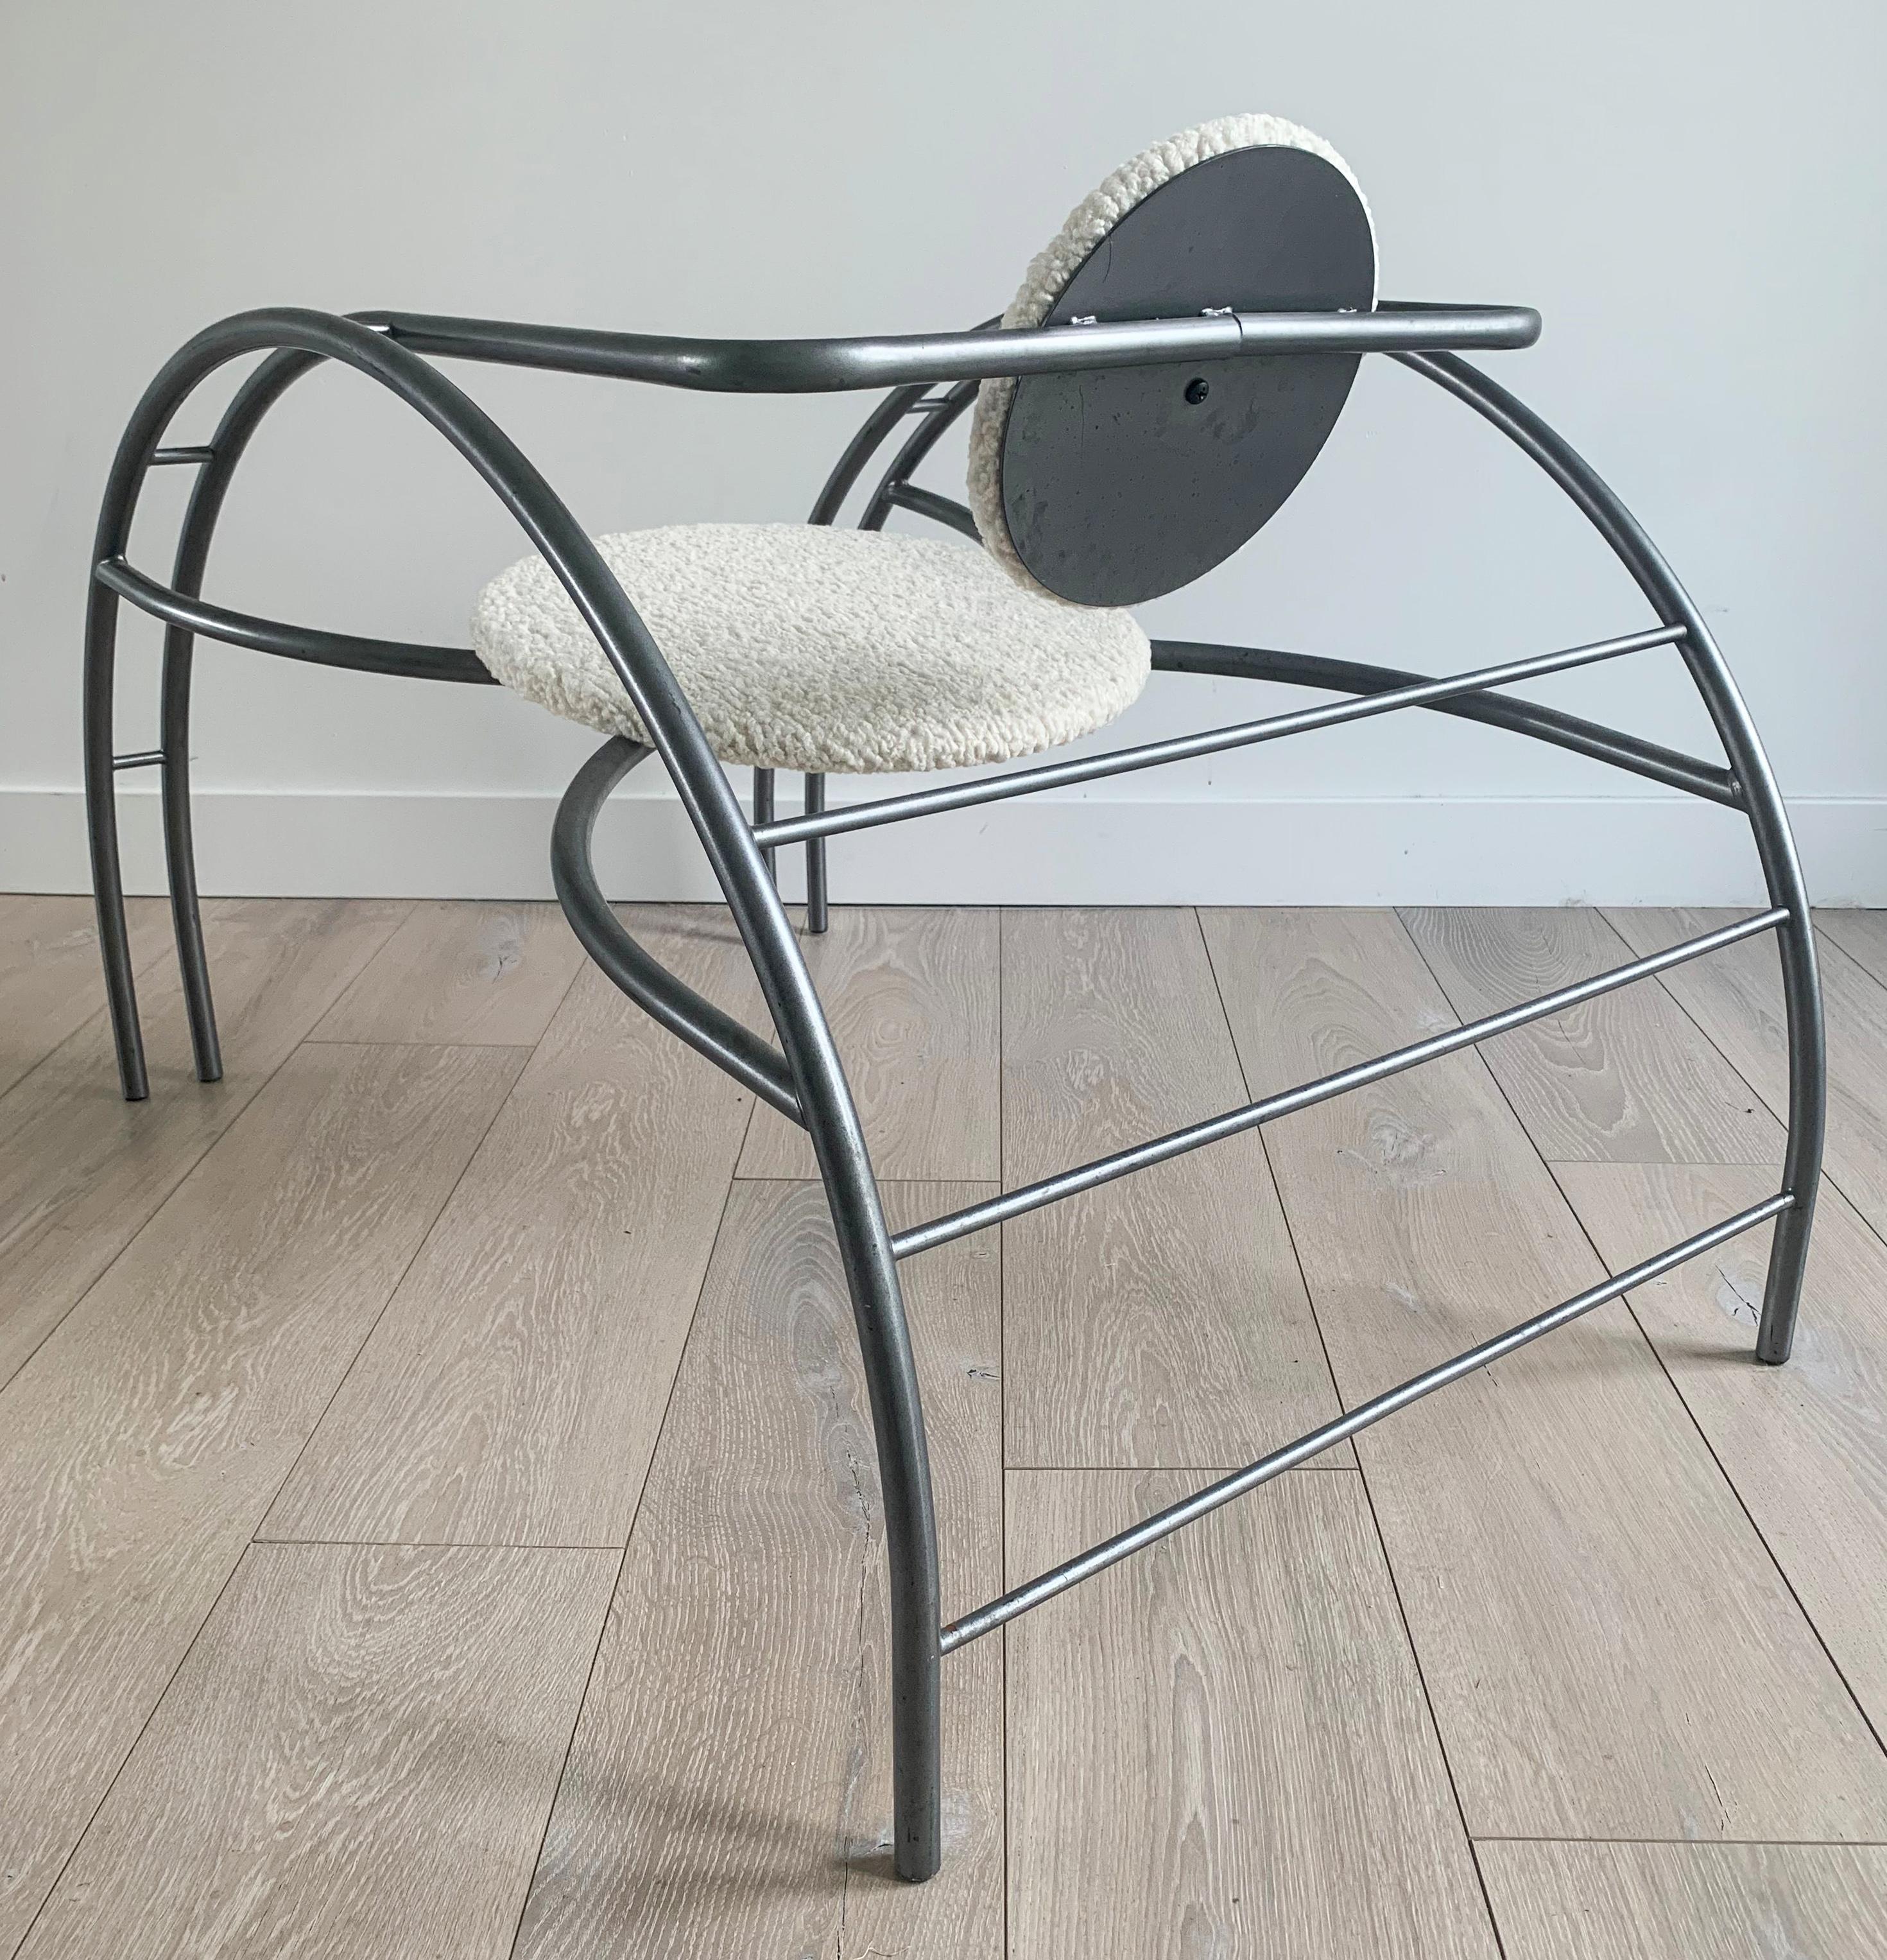 Postmodern Les Amisca Quebec 69 Spider Chair 1